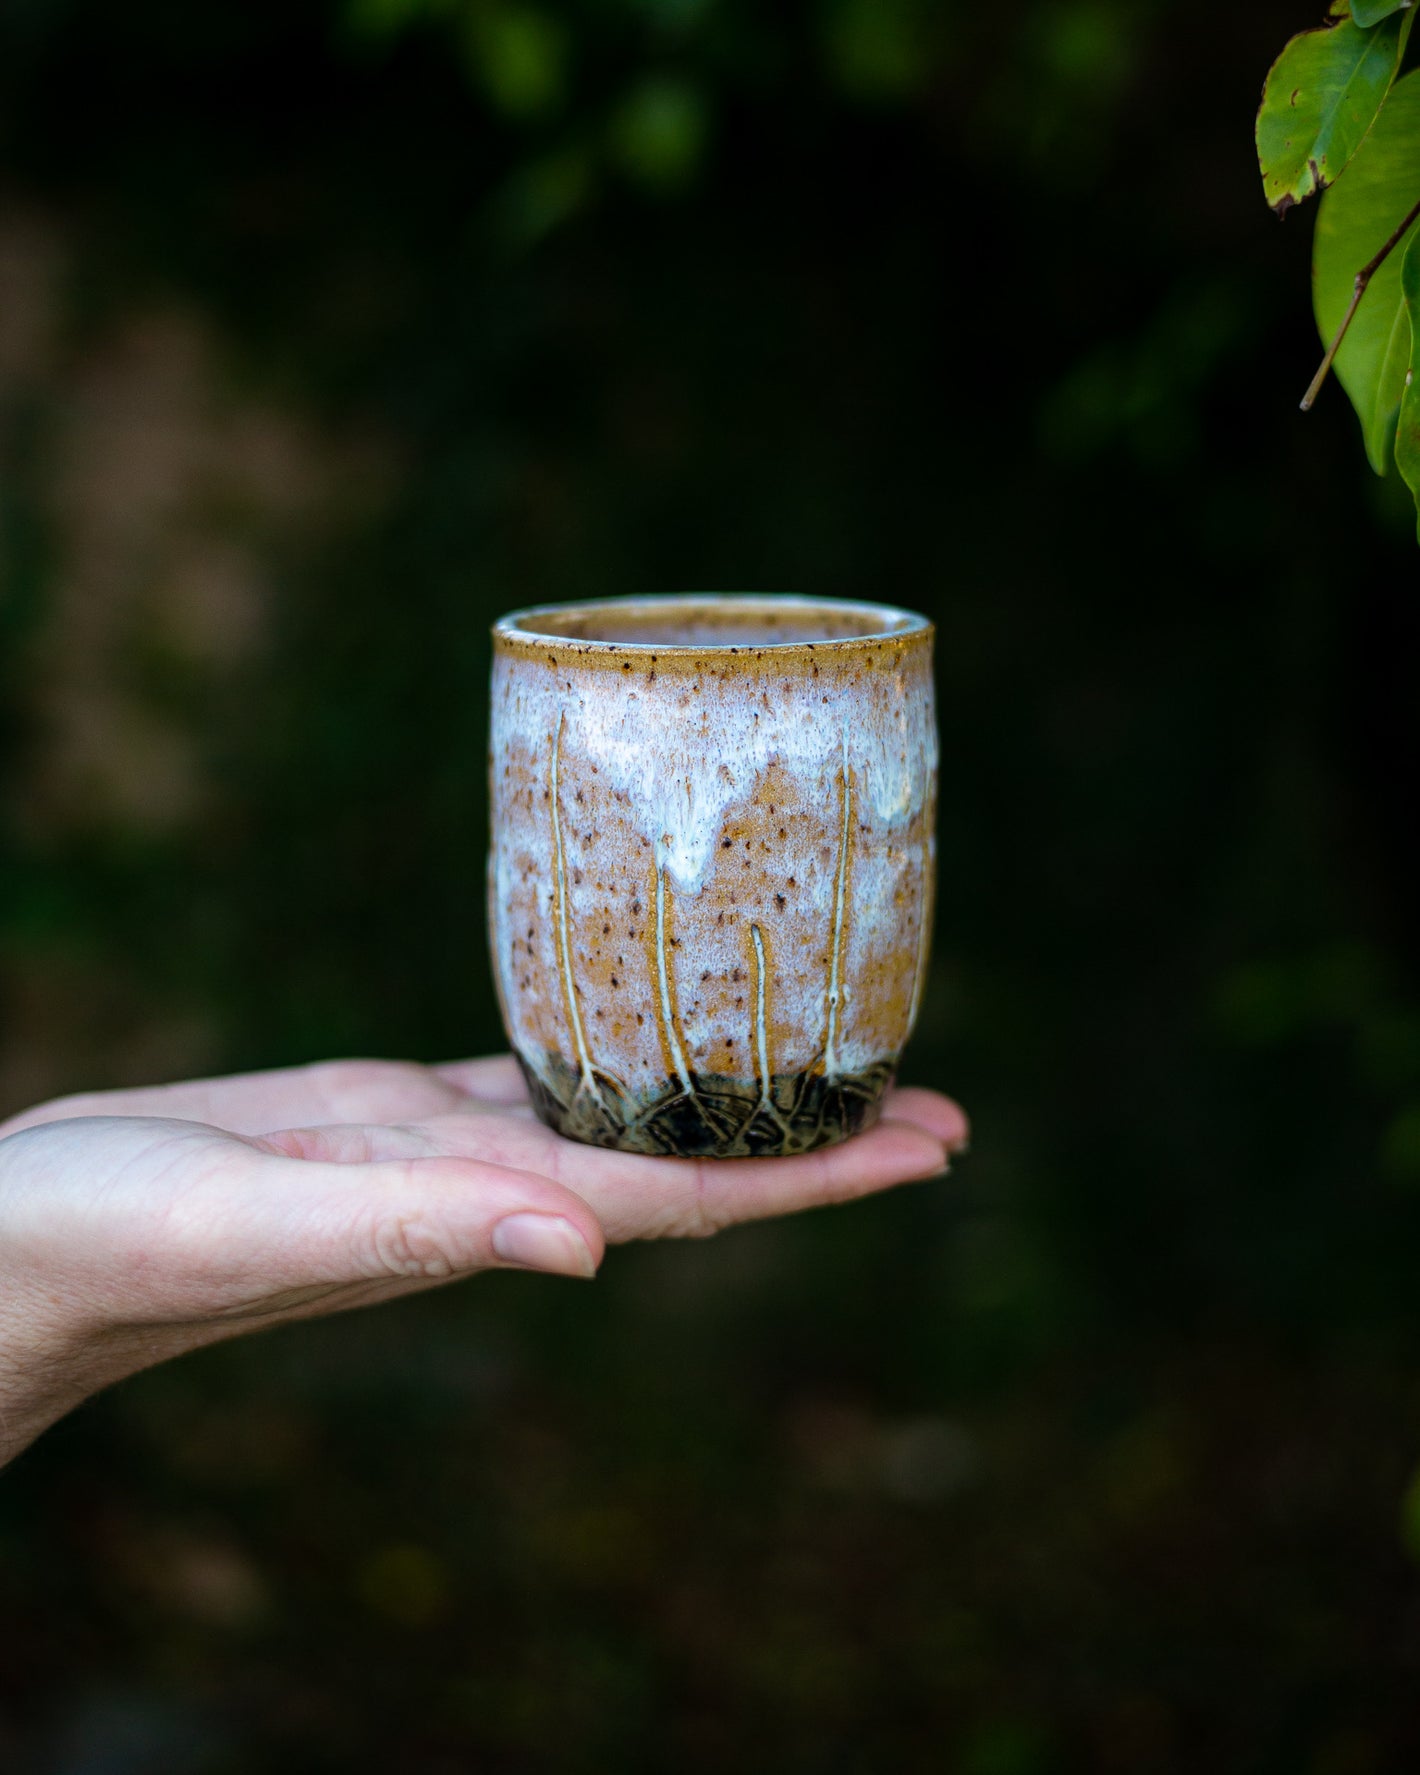 The Roots Tumbler which is a beautiful functional pottery piece by Dirtbag Ceramics. Inspired from the Pacific Crest Trail (PCT) and Continental Divide Trail (CDT)